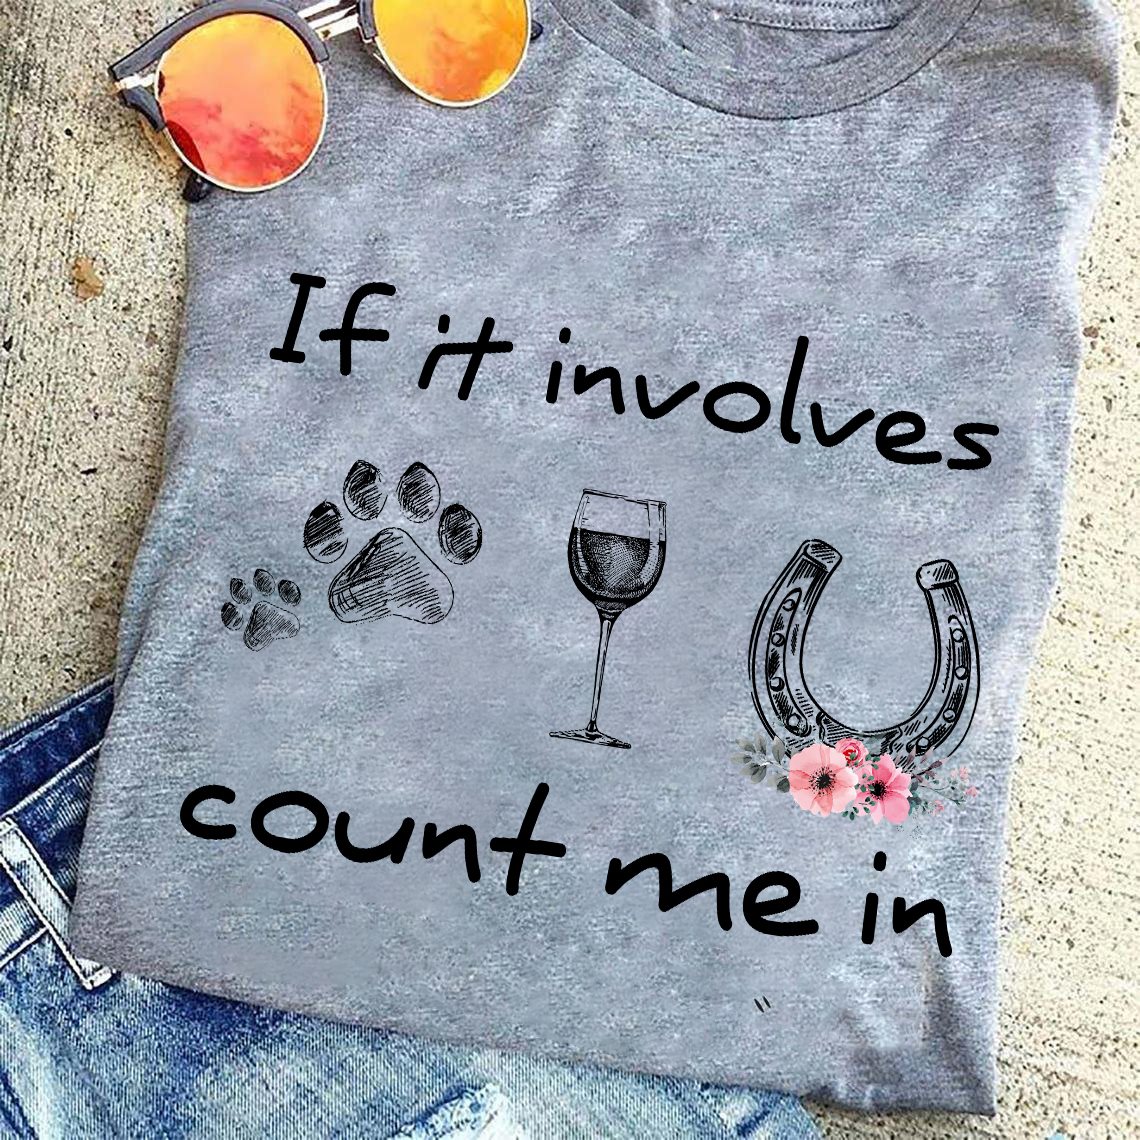 If it involves count me in - Dog, wine and horse lover